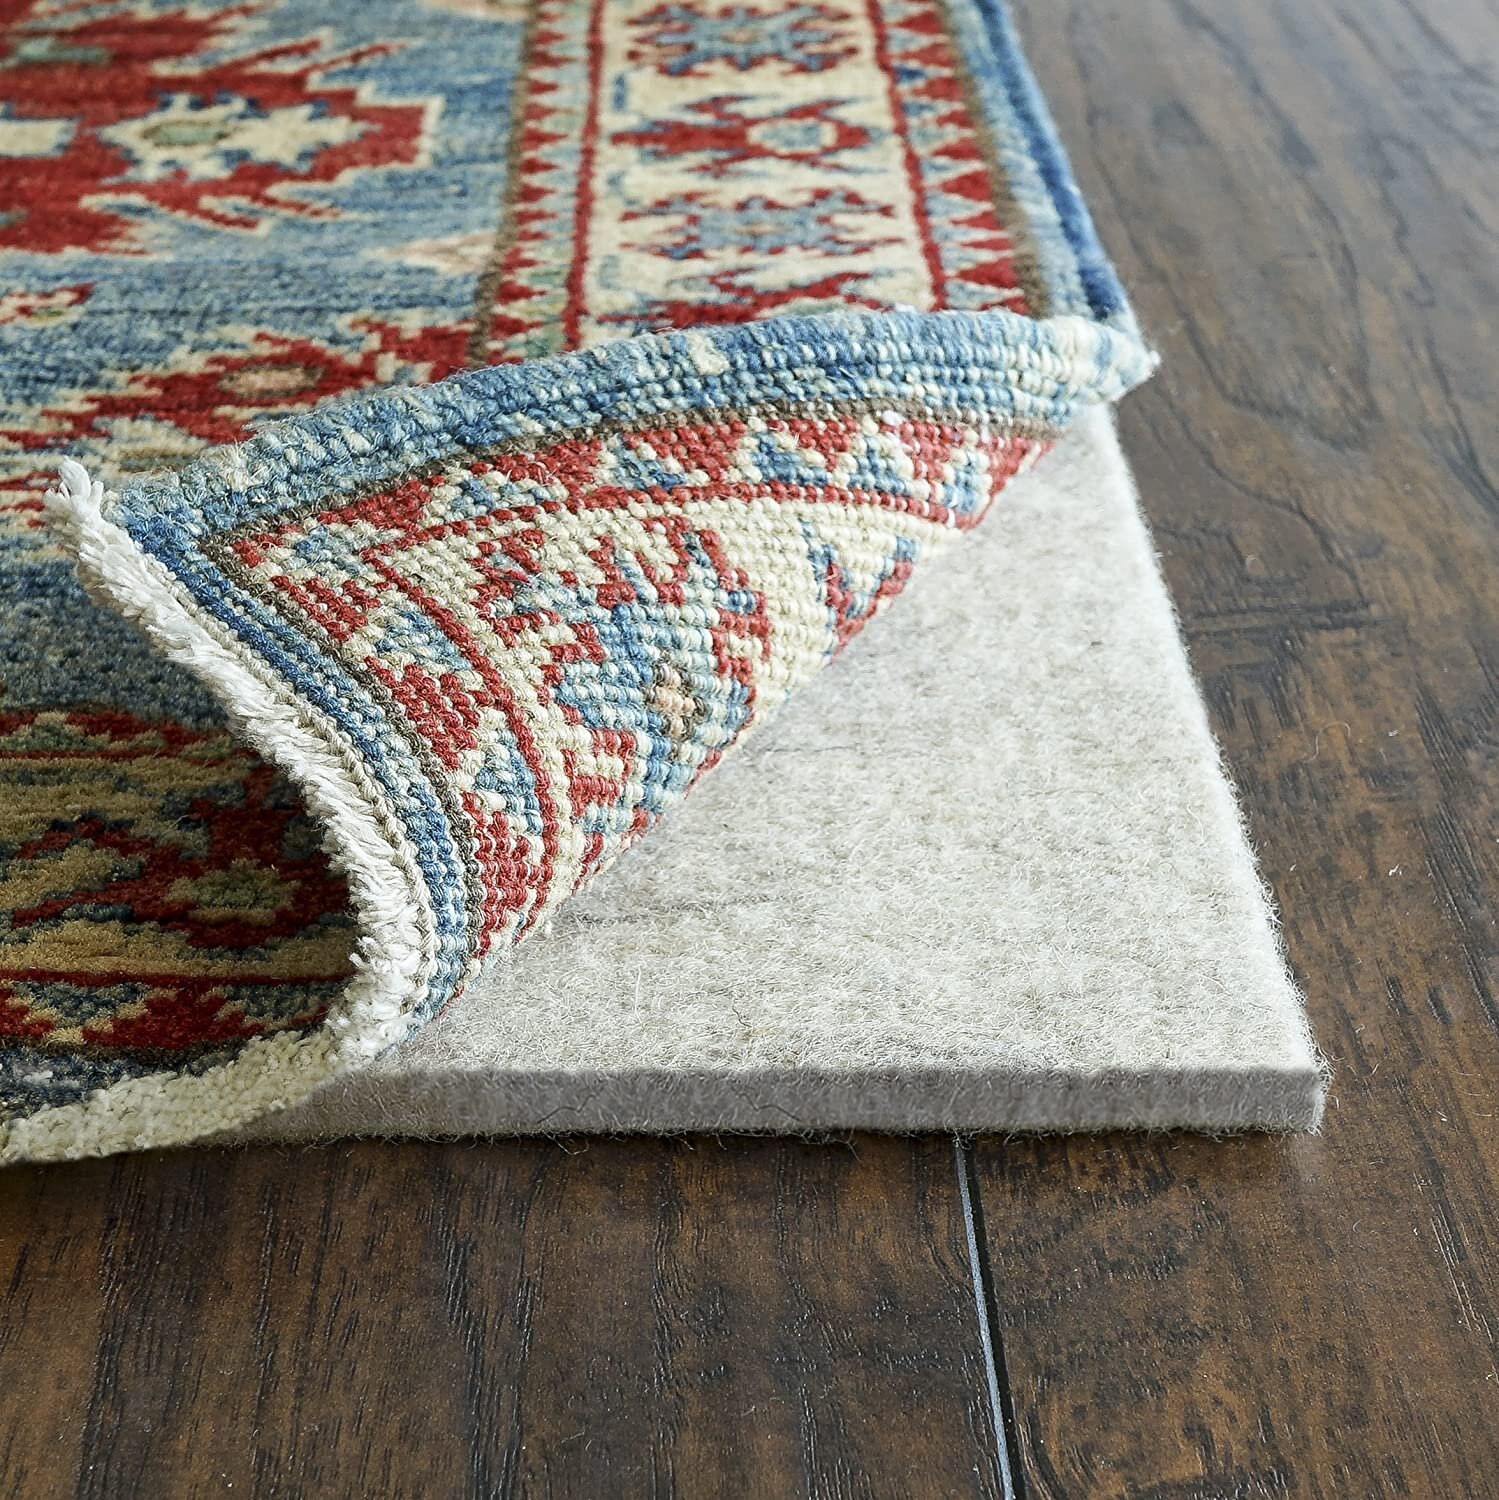 Rug Pads for Every Rug and Floor Type - RugPadUSA